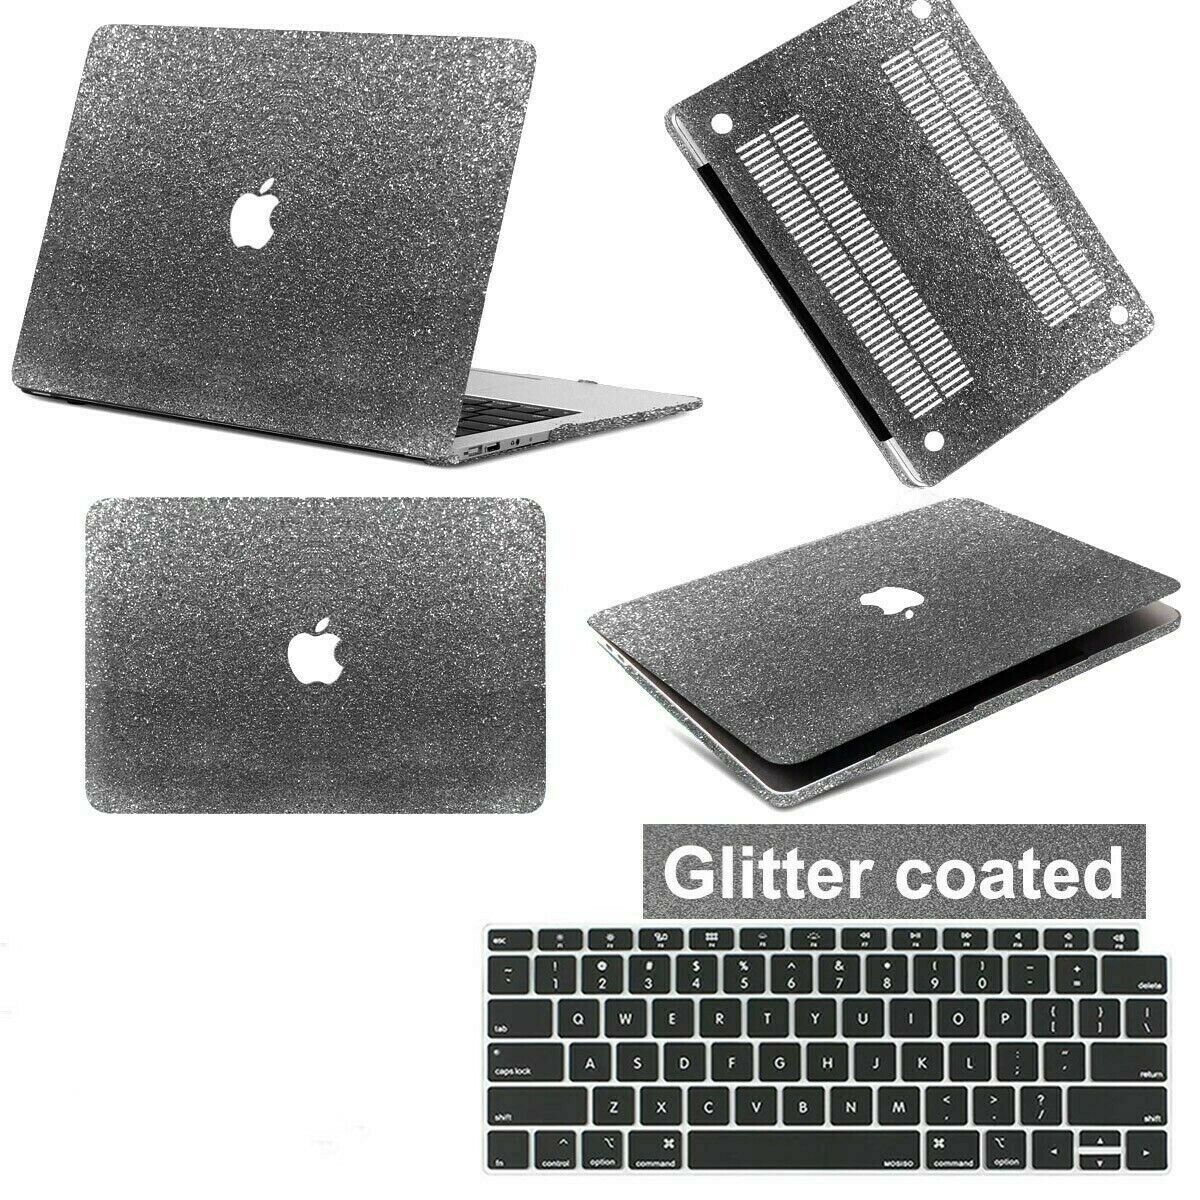 Shinny Glitter Powder Laptop Rubberized Hard Case Cover For New Macbook Pro Air